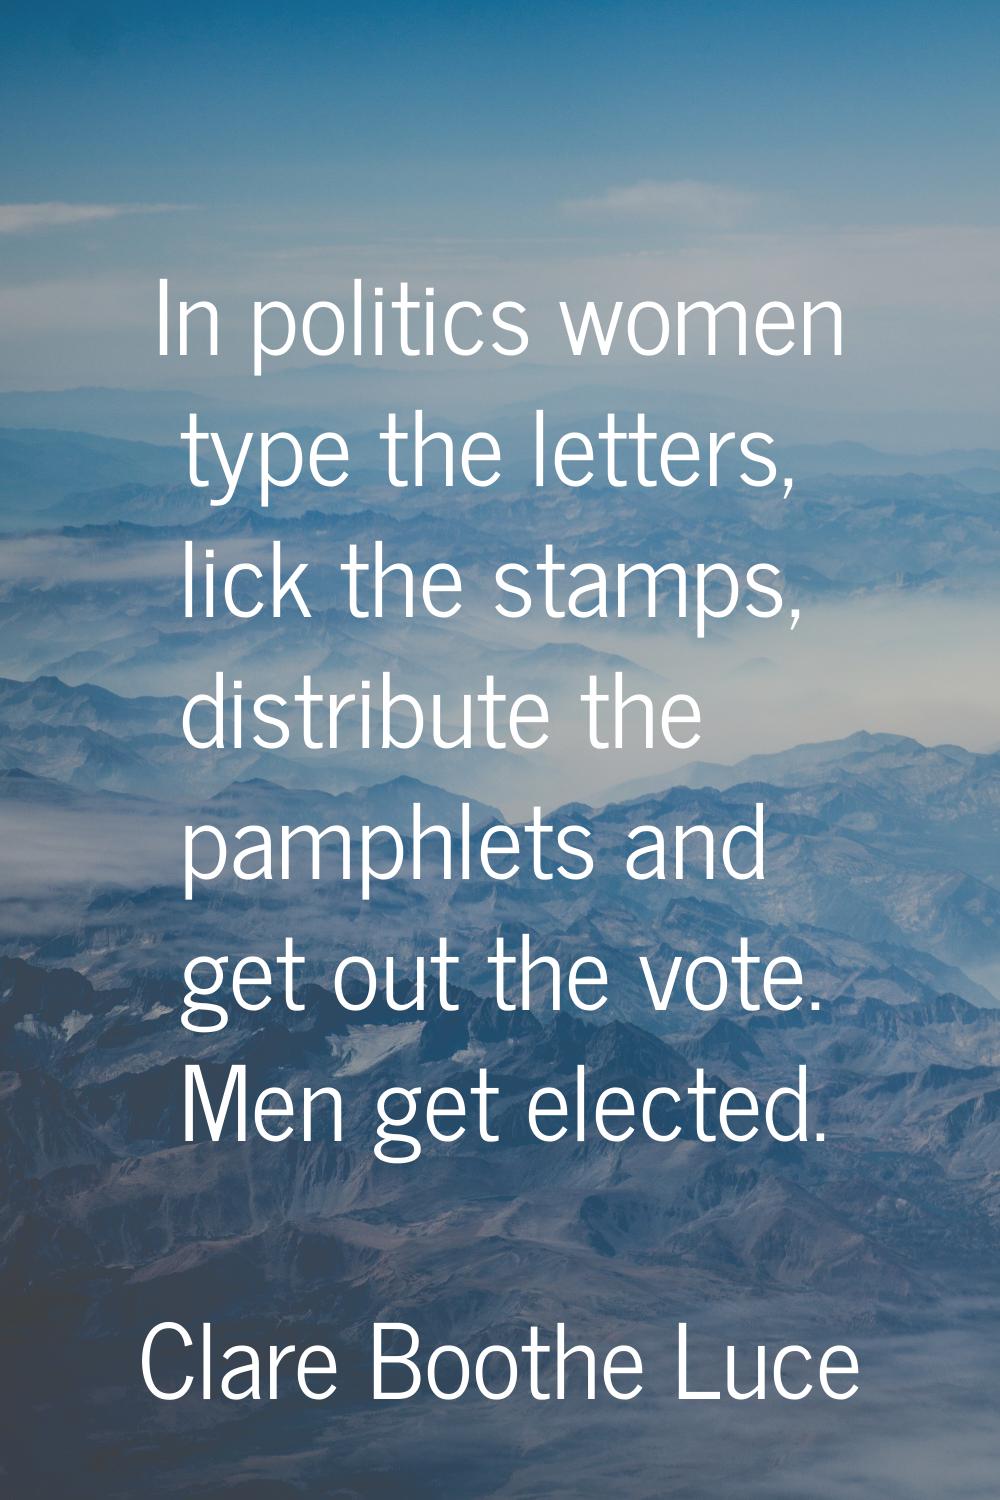 In politics women type the letters, lick the stamps, distribute the pamphlets and get out the vote.